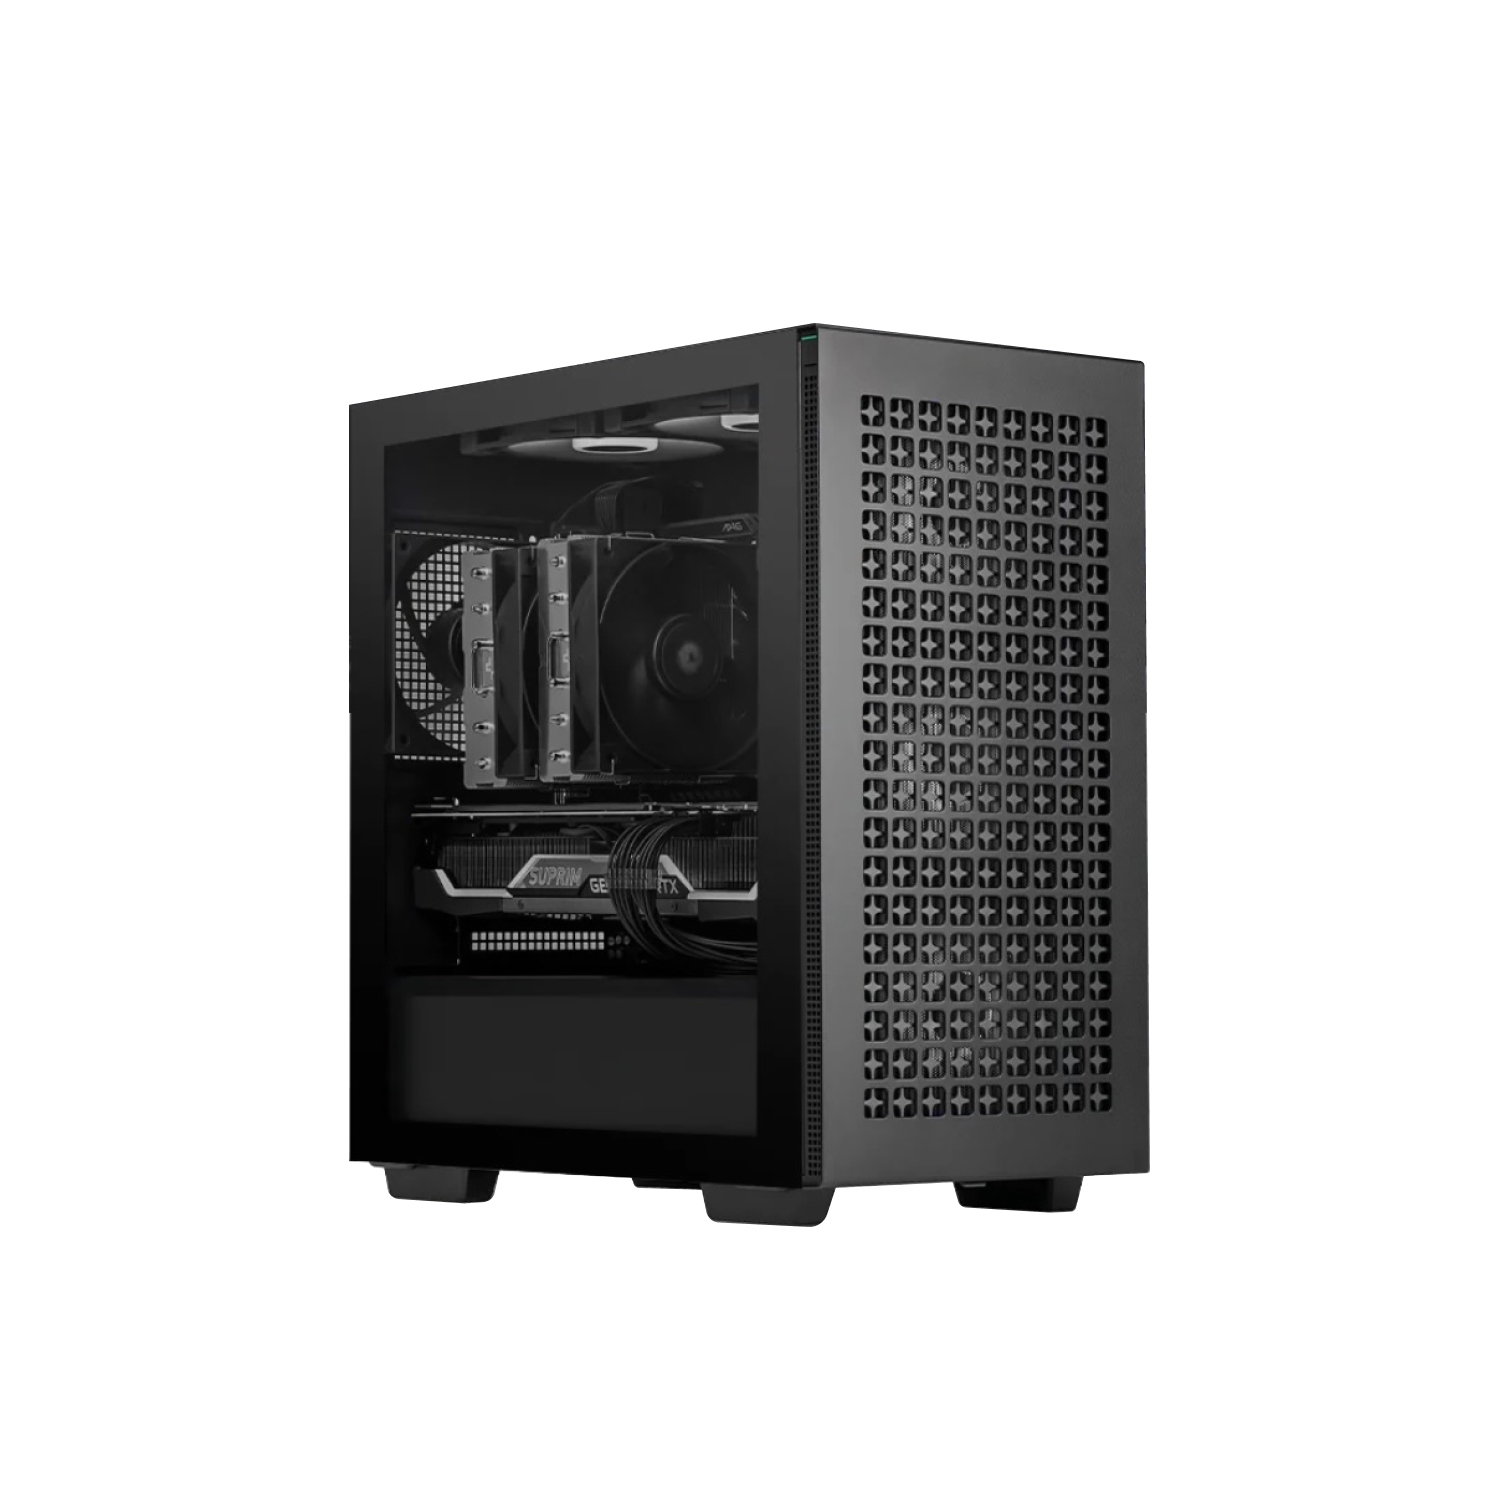 Zonic Business Custom PC, Intel Core i9-11900K, 8 Cores, 1 TB SSD, 32 GB RAM, Mid-Tower Case, Keyboard and Mouse, Windows 11 Pro